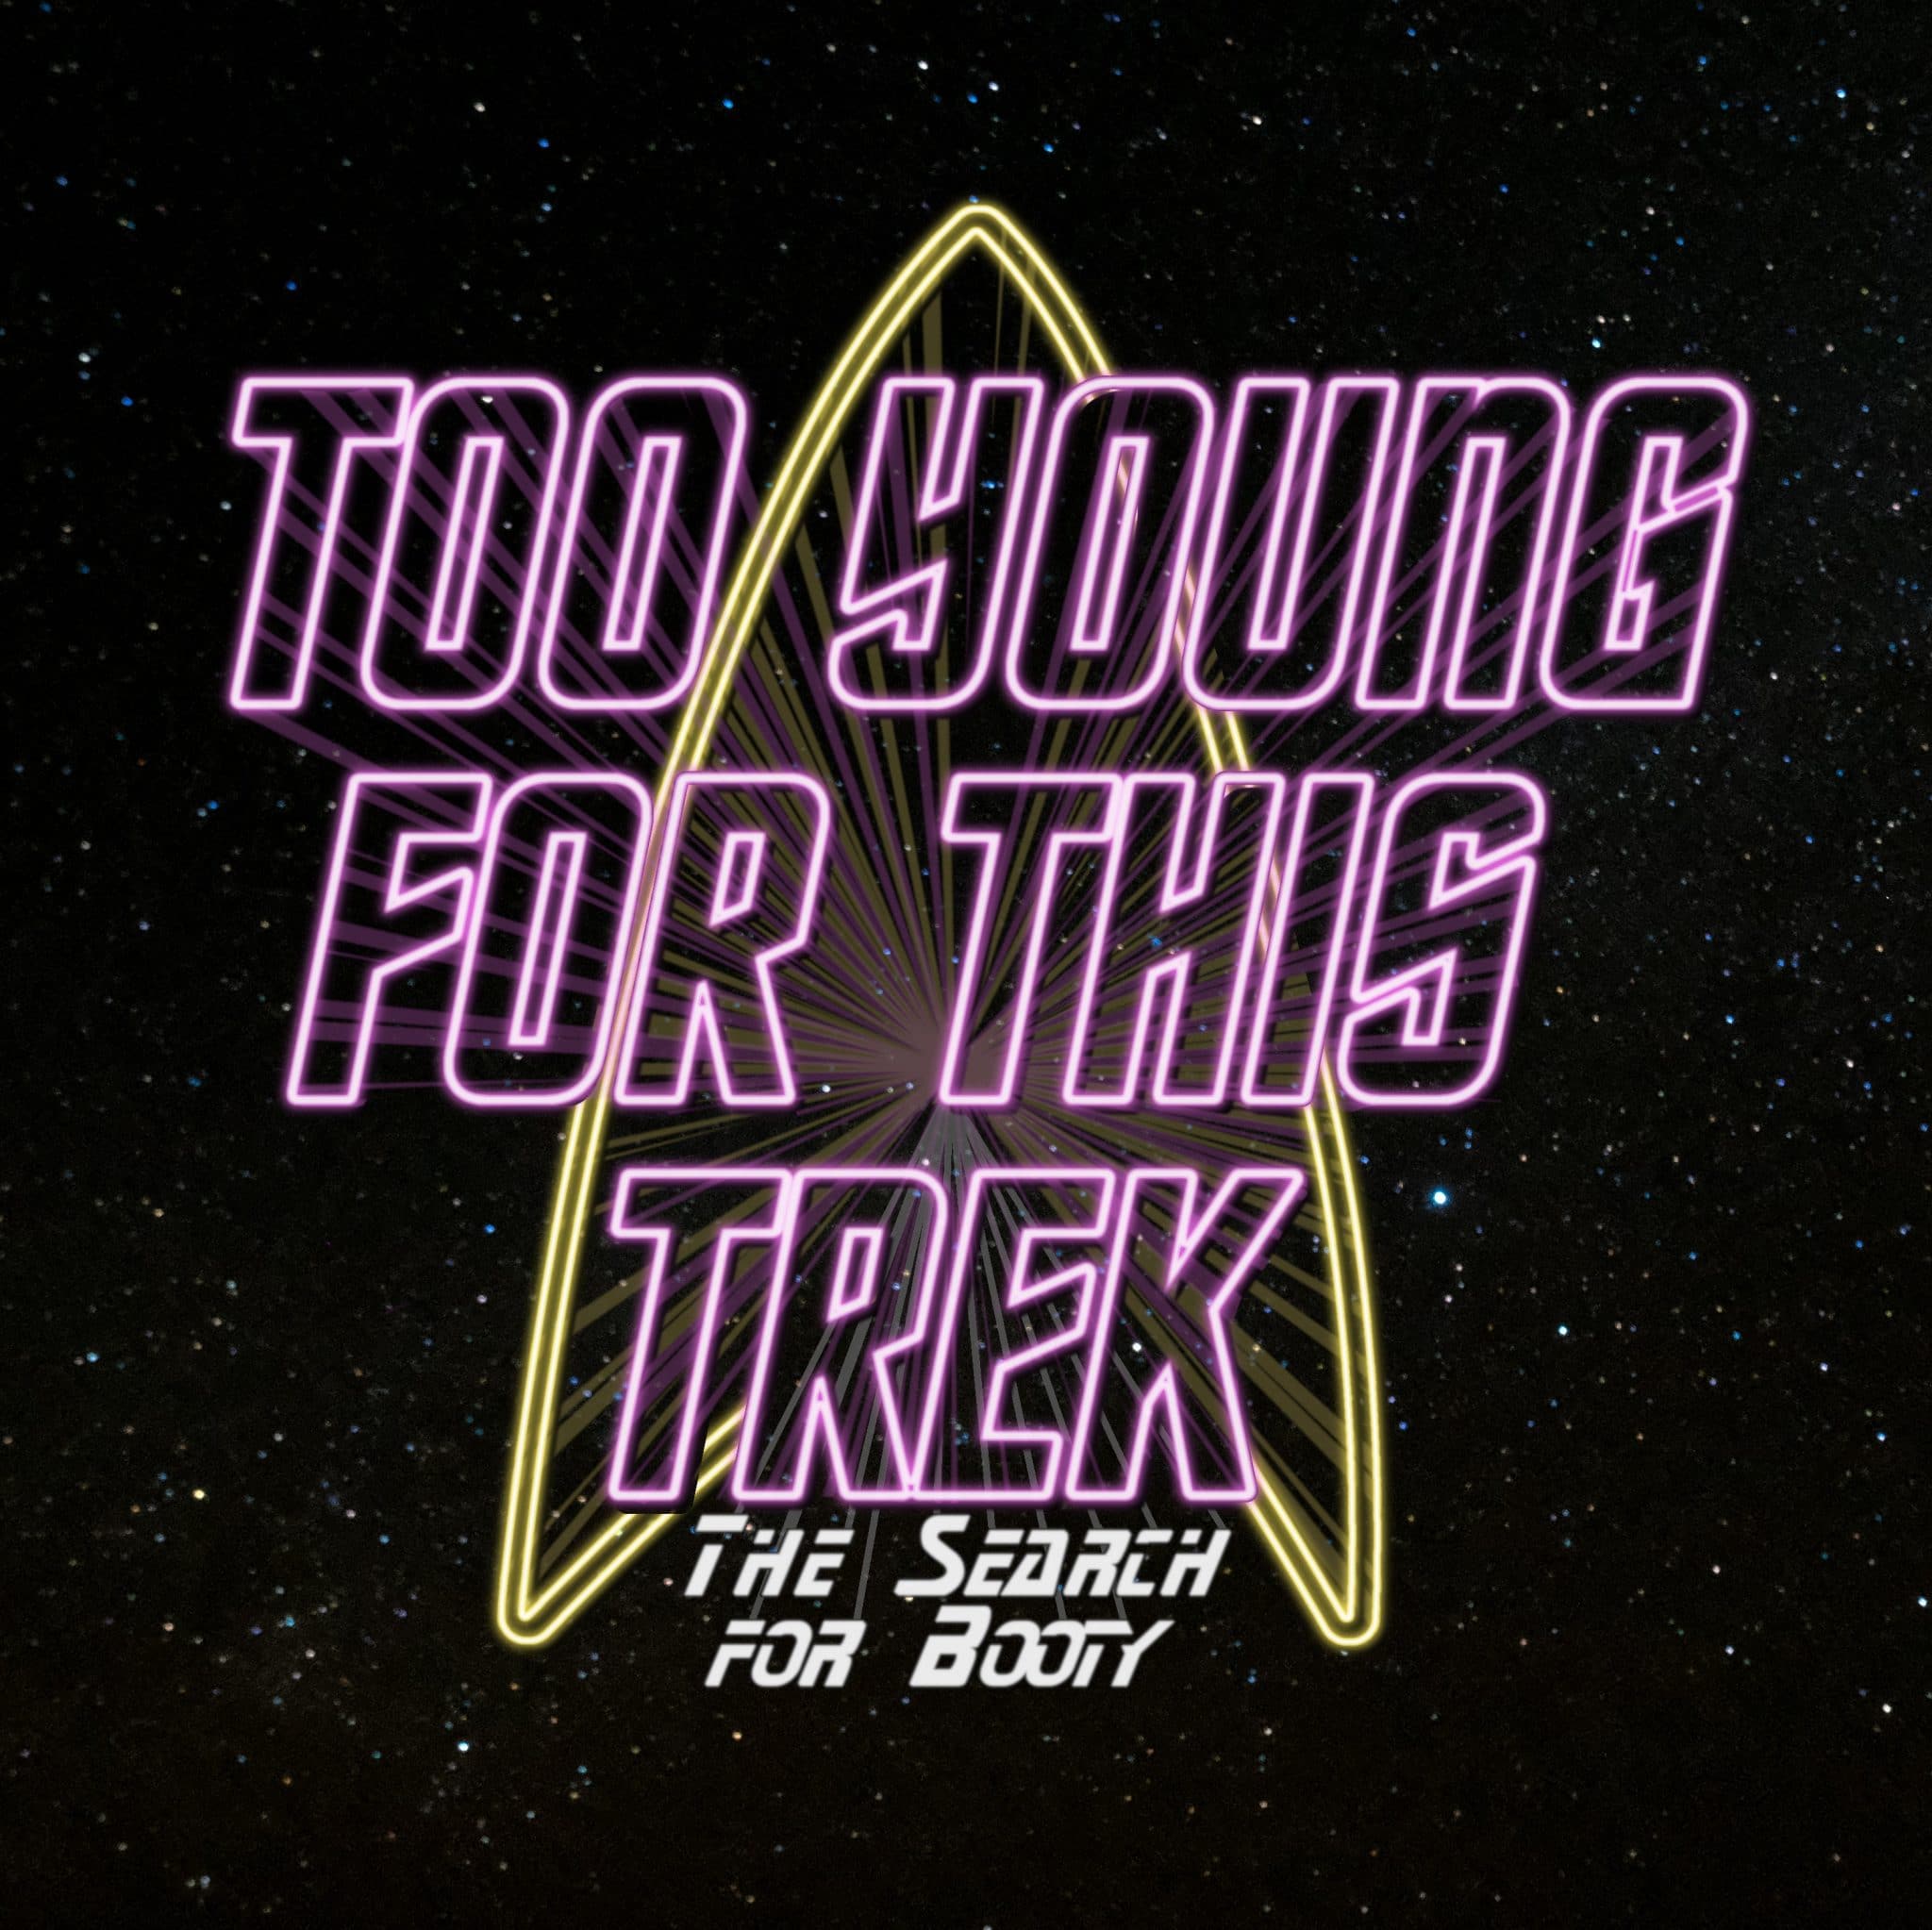 Too Young For This Trek